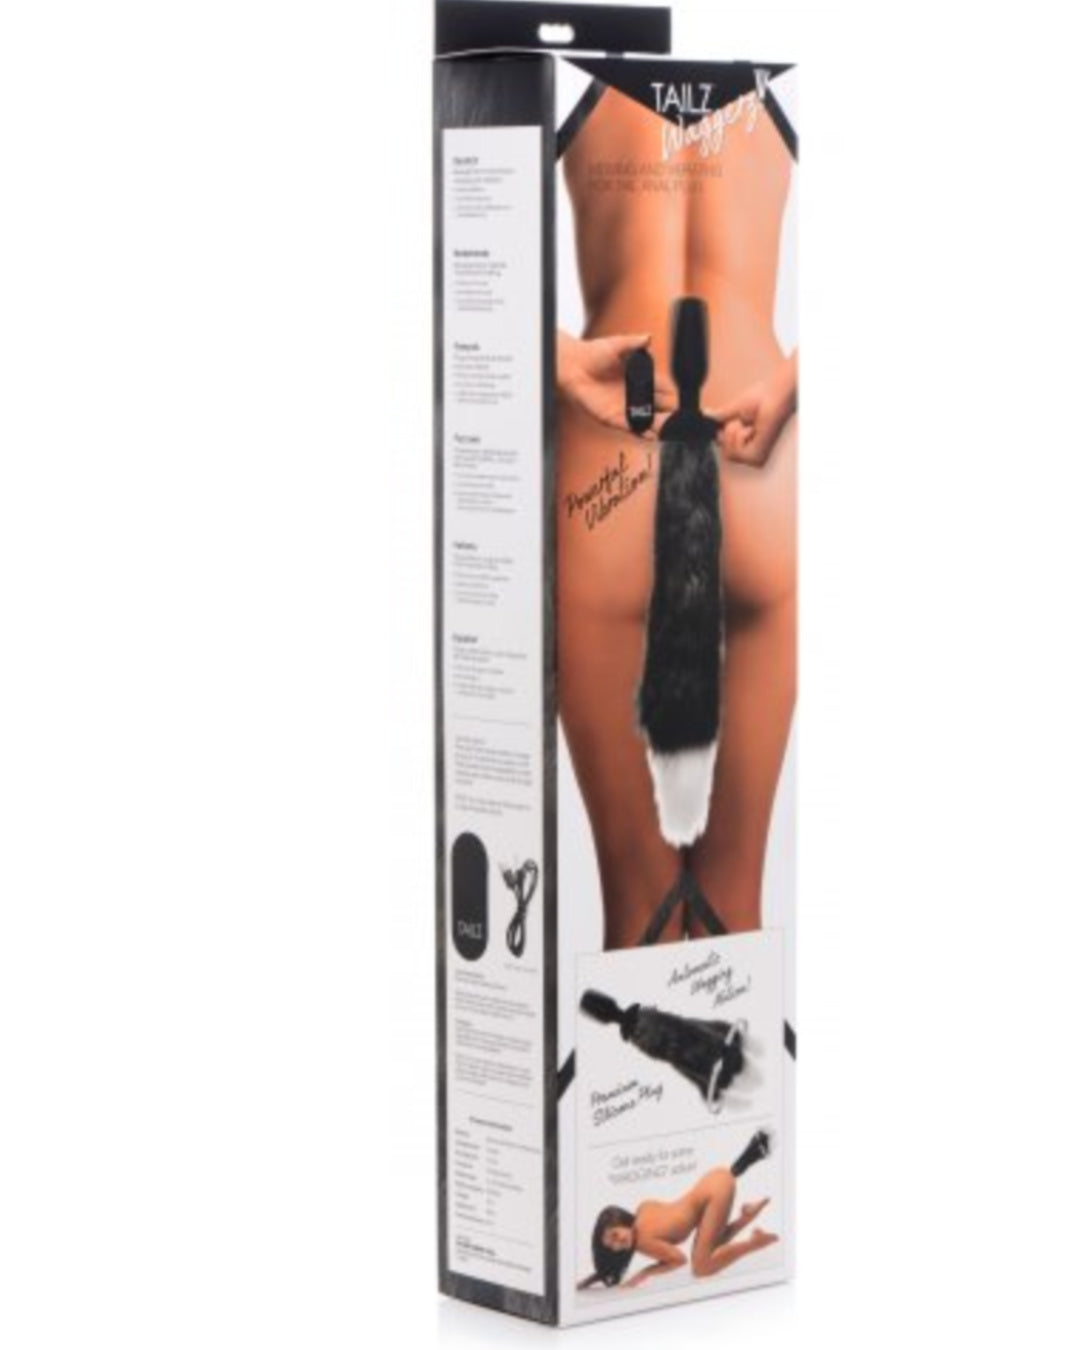 Tailz Waggerz Moving and Vibrating Fox Tail and Ears box close up 